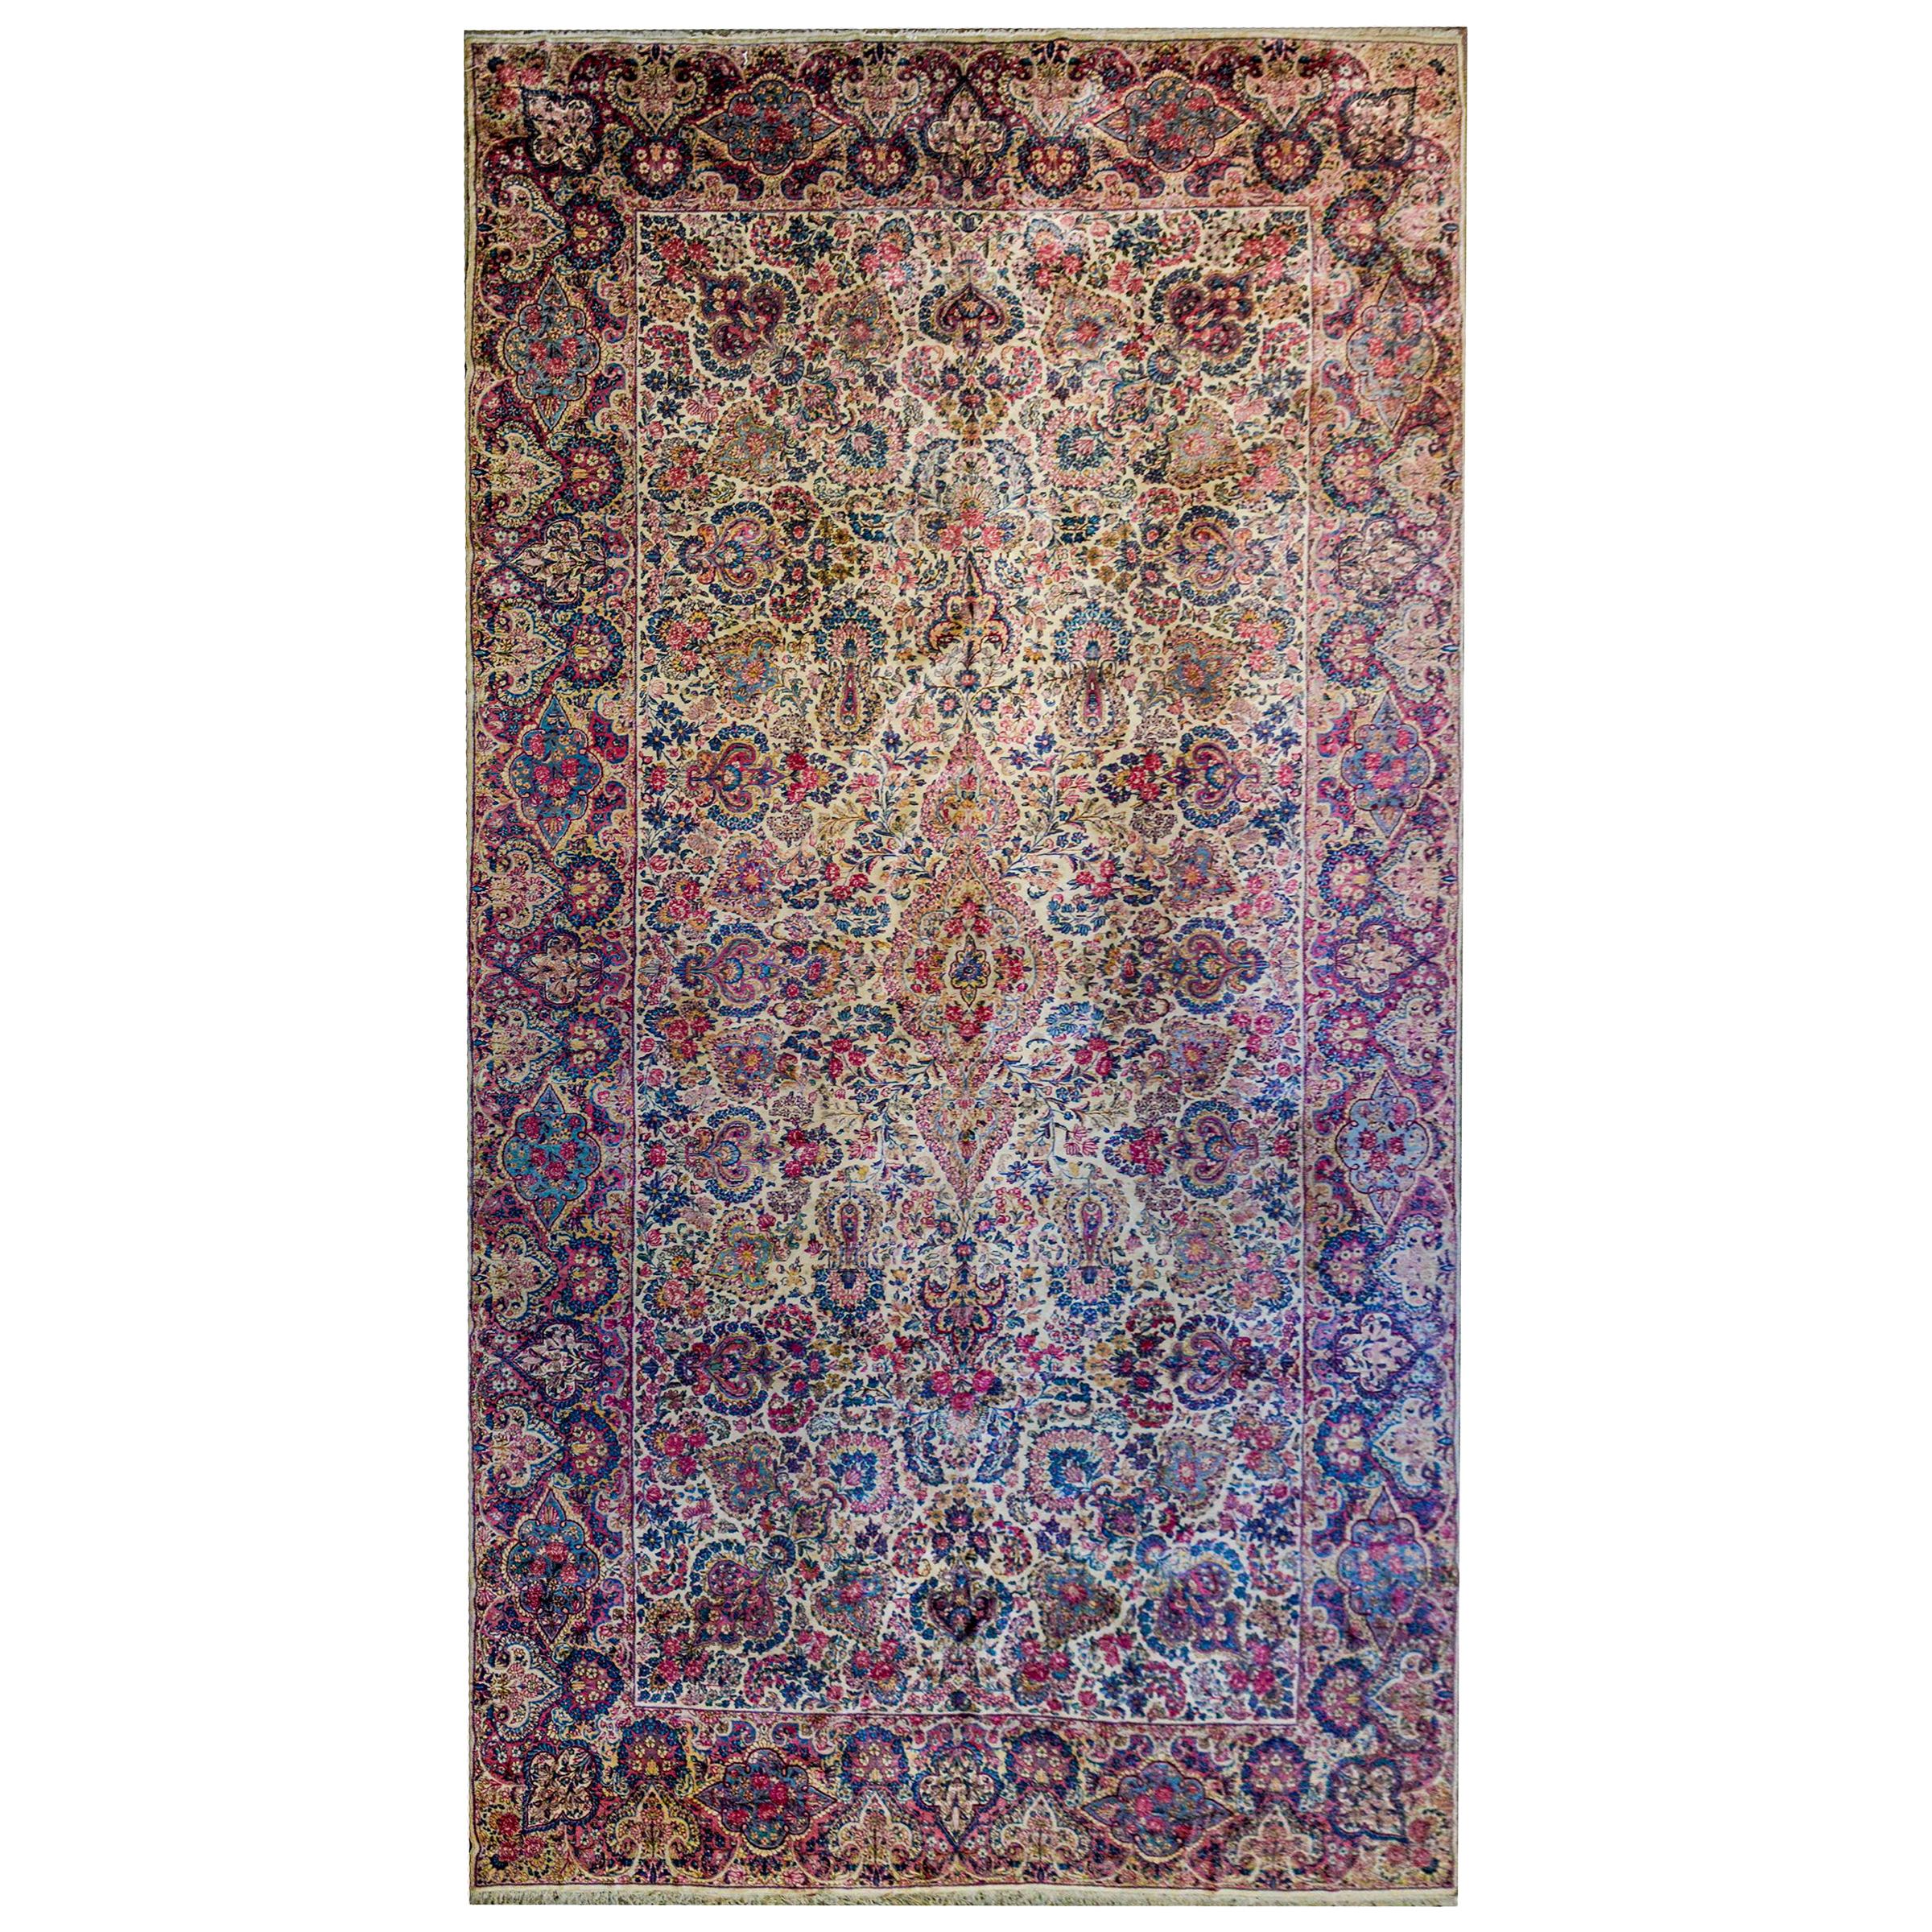 Exquisite Early 20th Century Lavar Kirman Rug